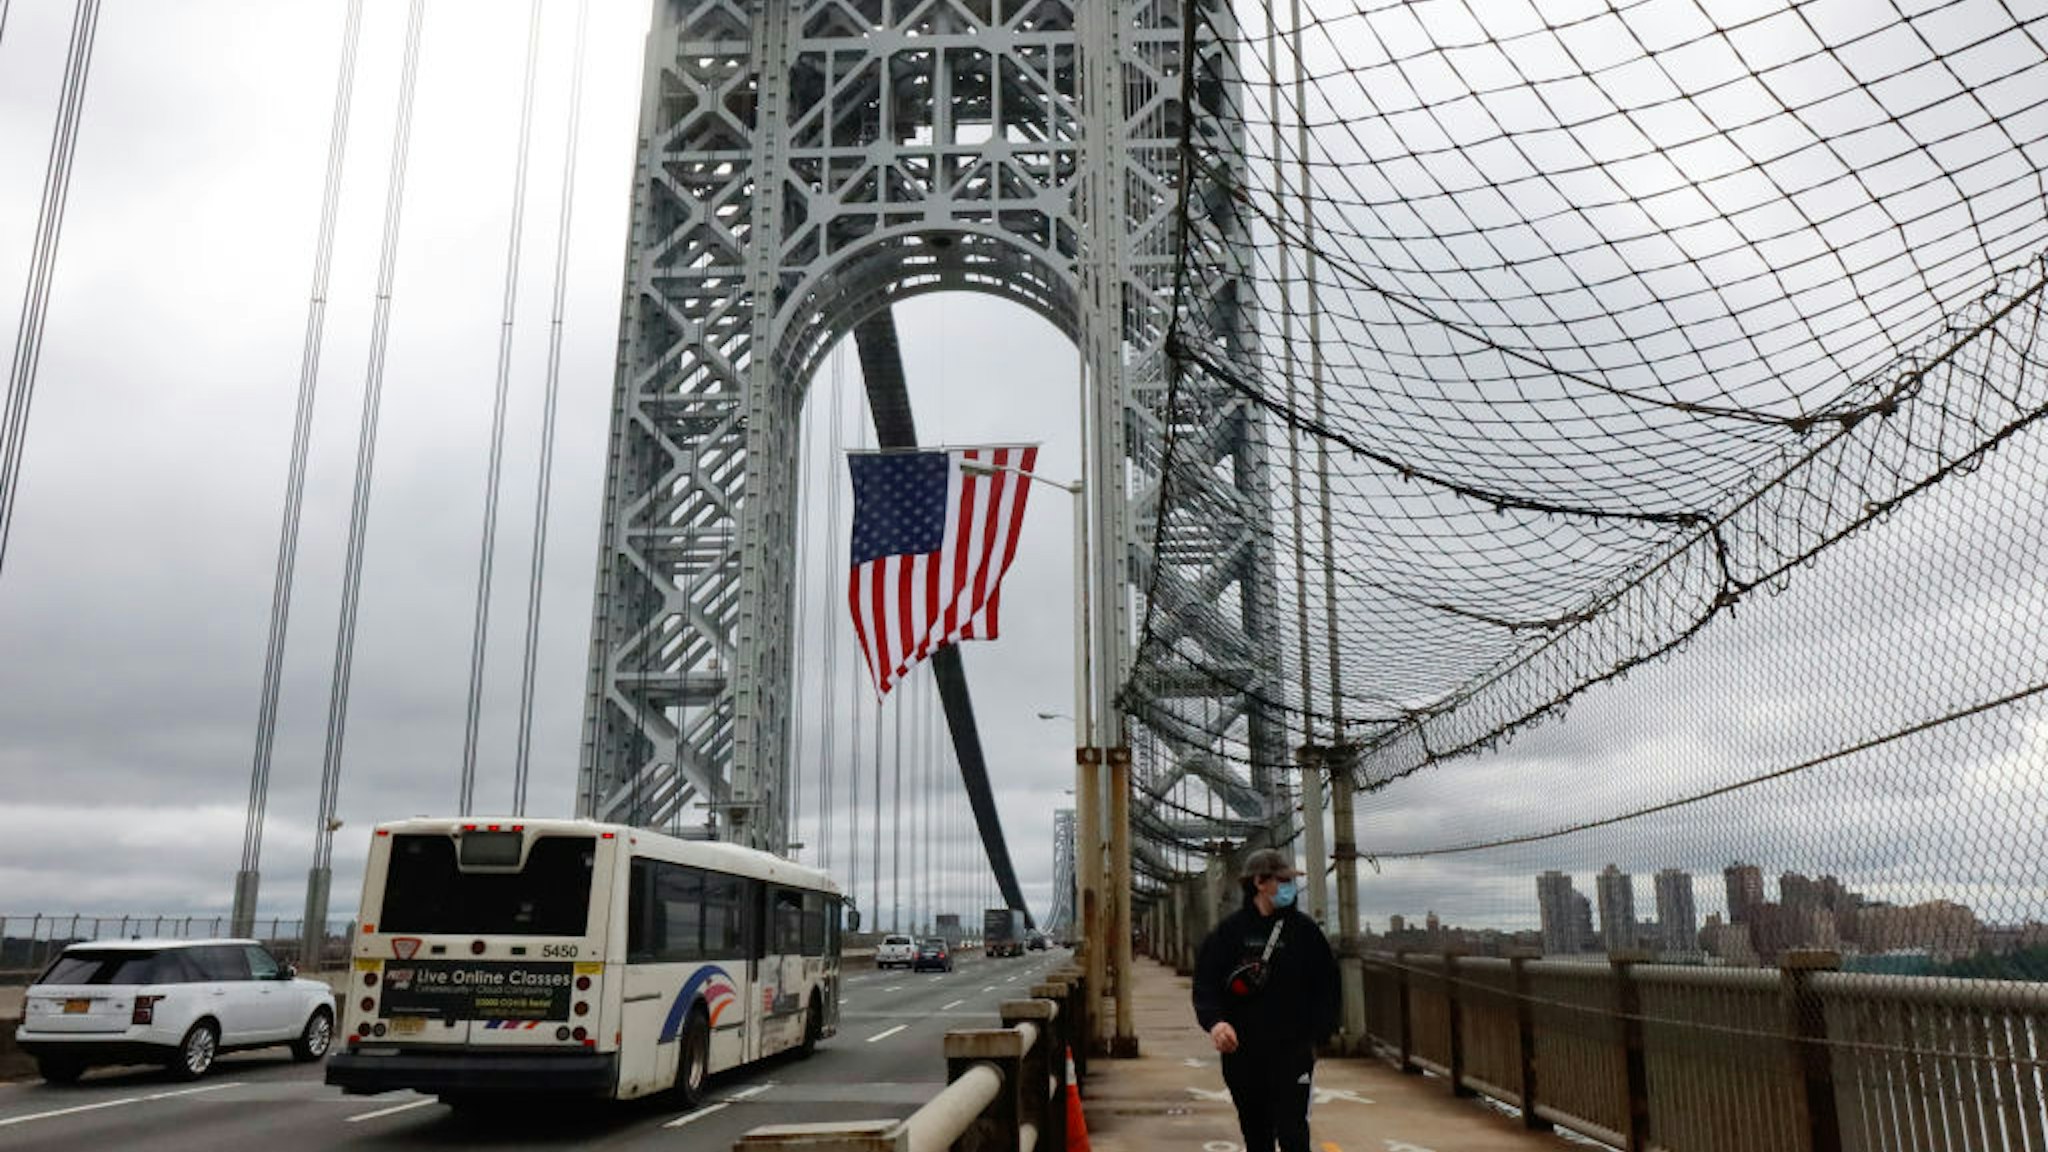 FT. LEE, NJ - MAY 31: The George Washington Bridge hangs its 60 x 90-foot American flag from the New Jersey side tower to mark Memorial Day as an NJ Transit bus heads to New York City on May 31, 2021 in Ft. Lee, New Jersey.